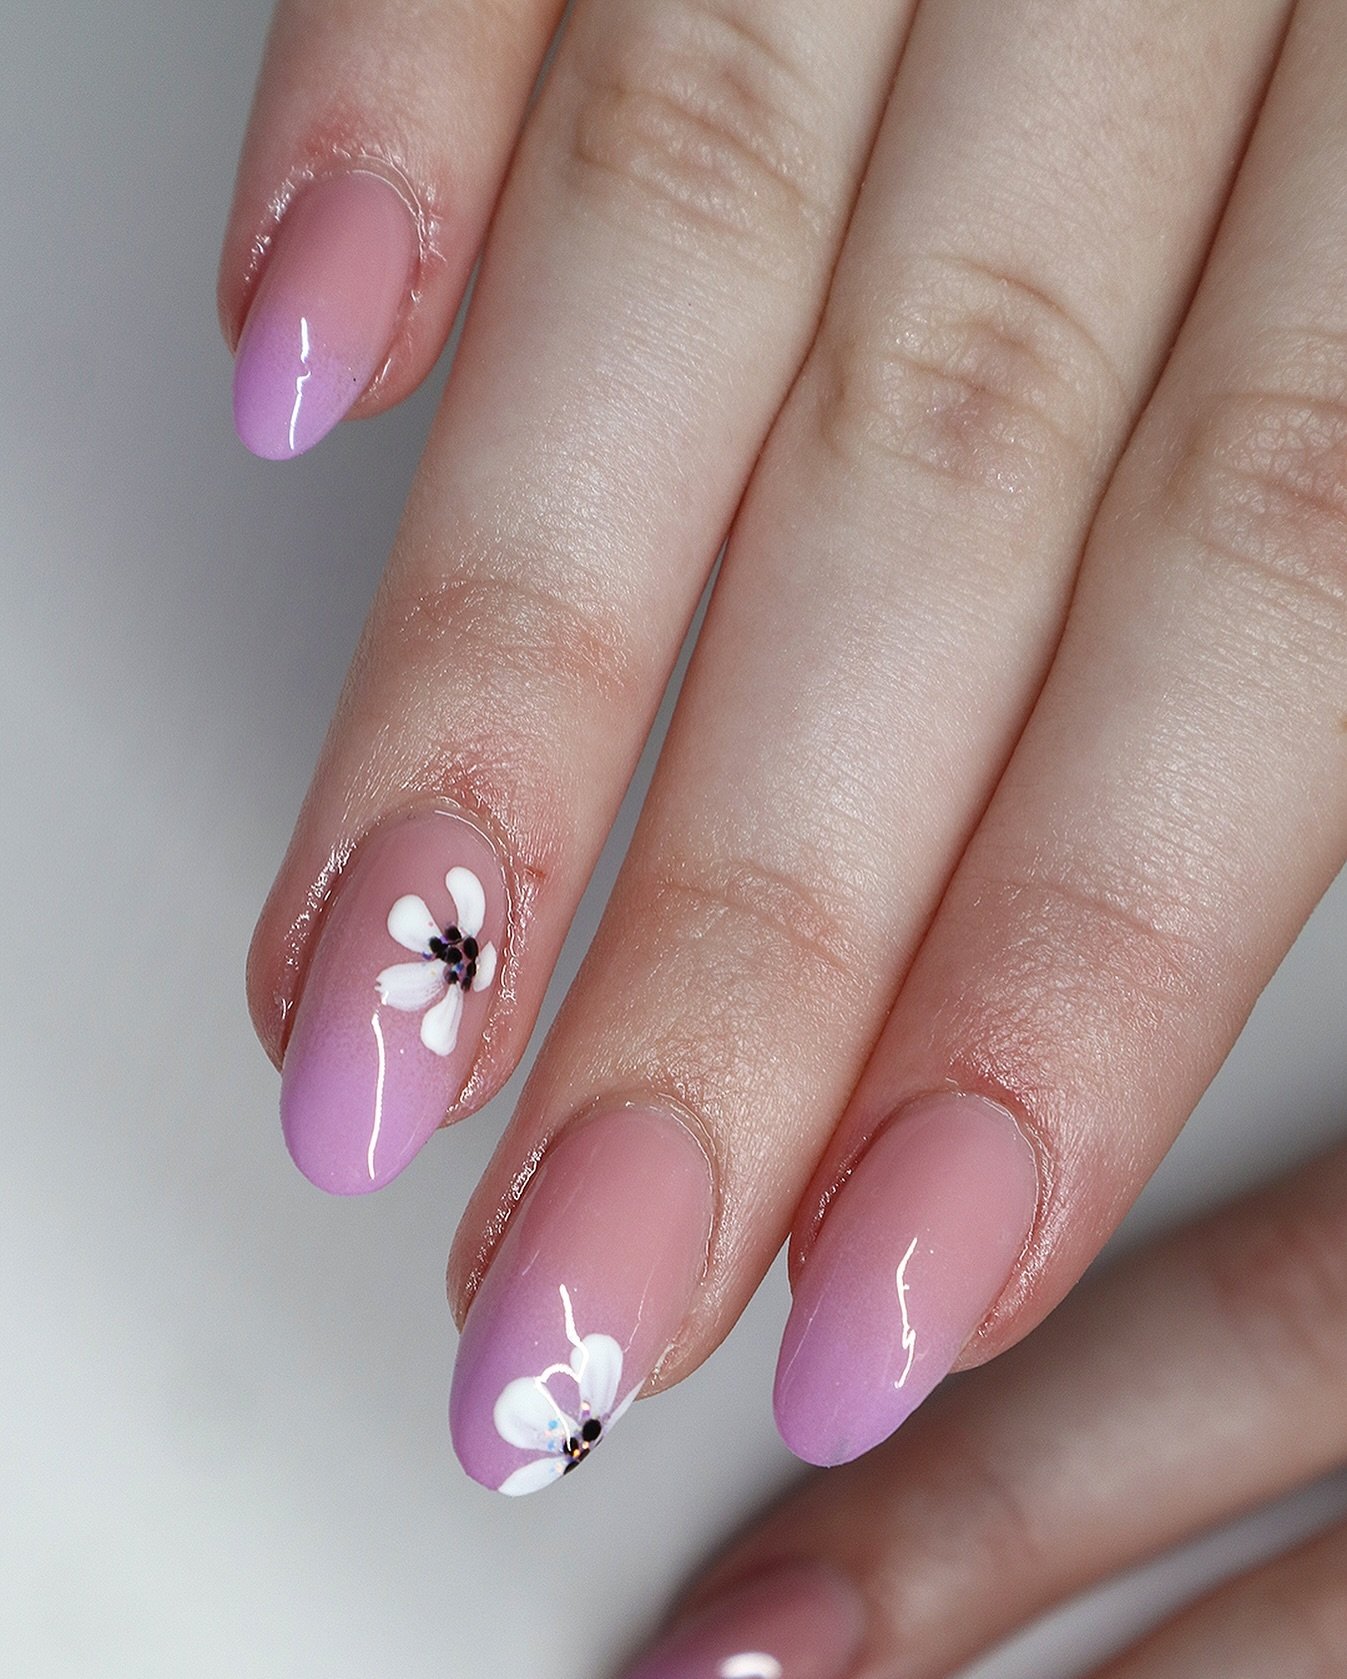 Pastel ombres + Spring florals 💜

📅 Message me to book your appointments for Spring!

shop this look at @tickledpinquecanada 🛒

&bull; Prep
&bull; Prime
&bull; Base Gel
&bull; Gelato Sculpting Gel in Salted Caramel
&bull; Color Gel in 028 and 150
